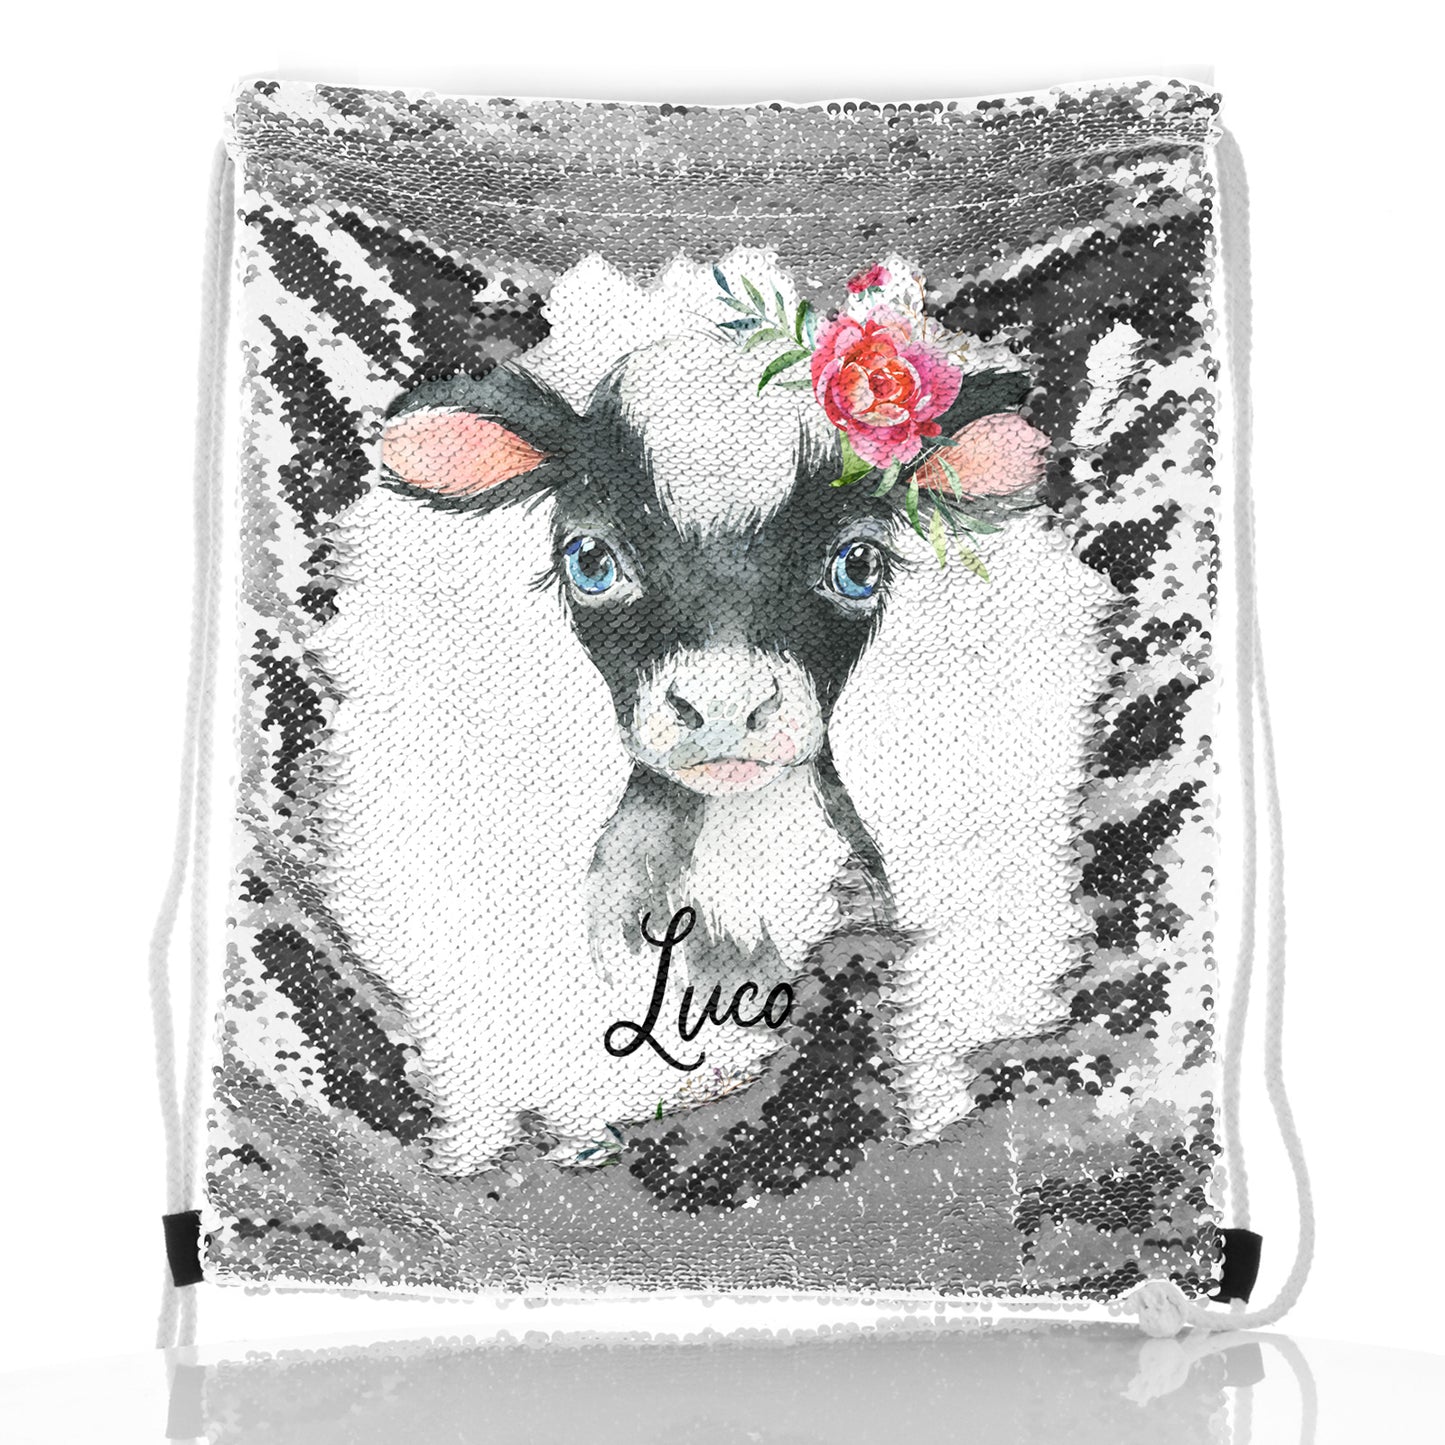 Personalised Sequin Drawstring Backpack with Black and White Cow Pink Rose Flowers and Cute Text